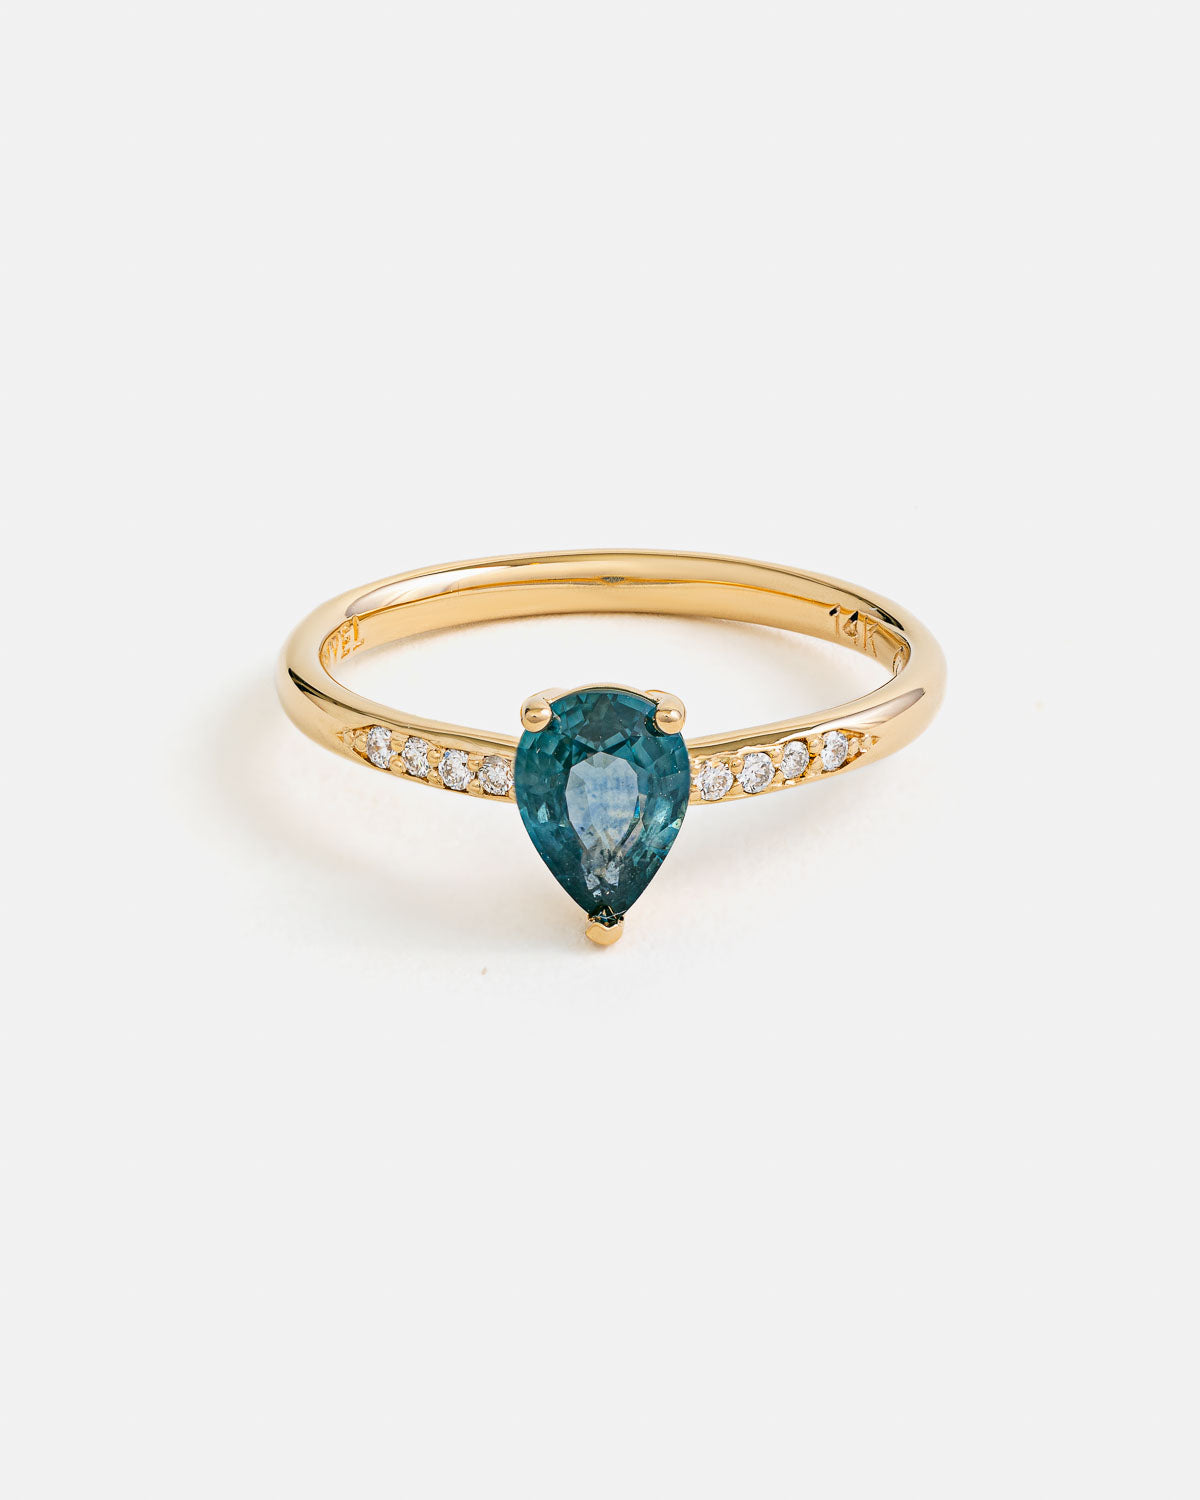 Pira Ring in Fairmined Yellow Gold with Australian Sapphire and lab grown Diamonds